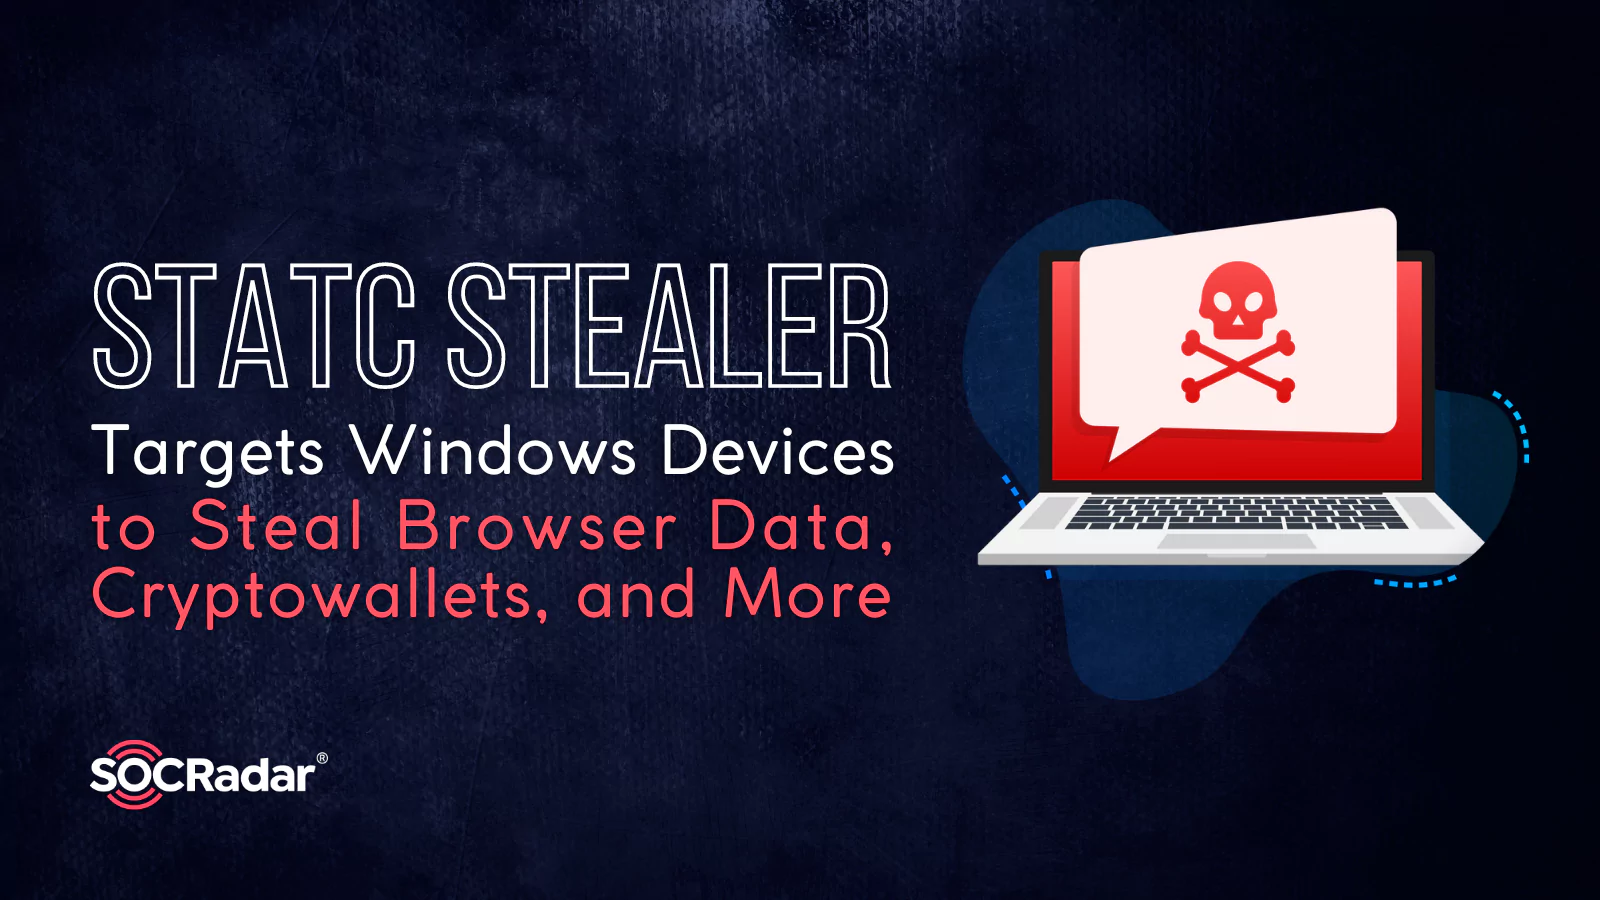 SOCRadar® Cyber Intelligence Inc. | New Malware “Statc Stealer” Targets Windows Devices to Steal Browser Data, Cryptowallets, and More